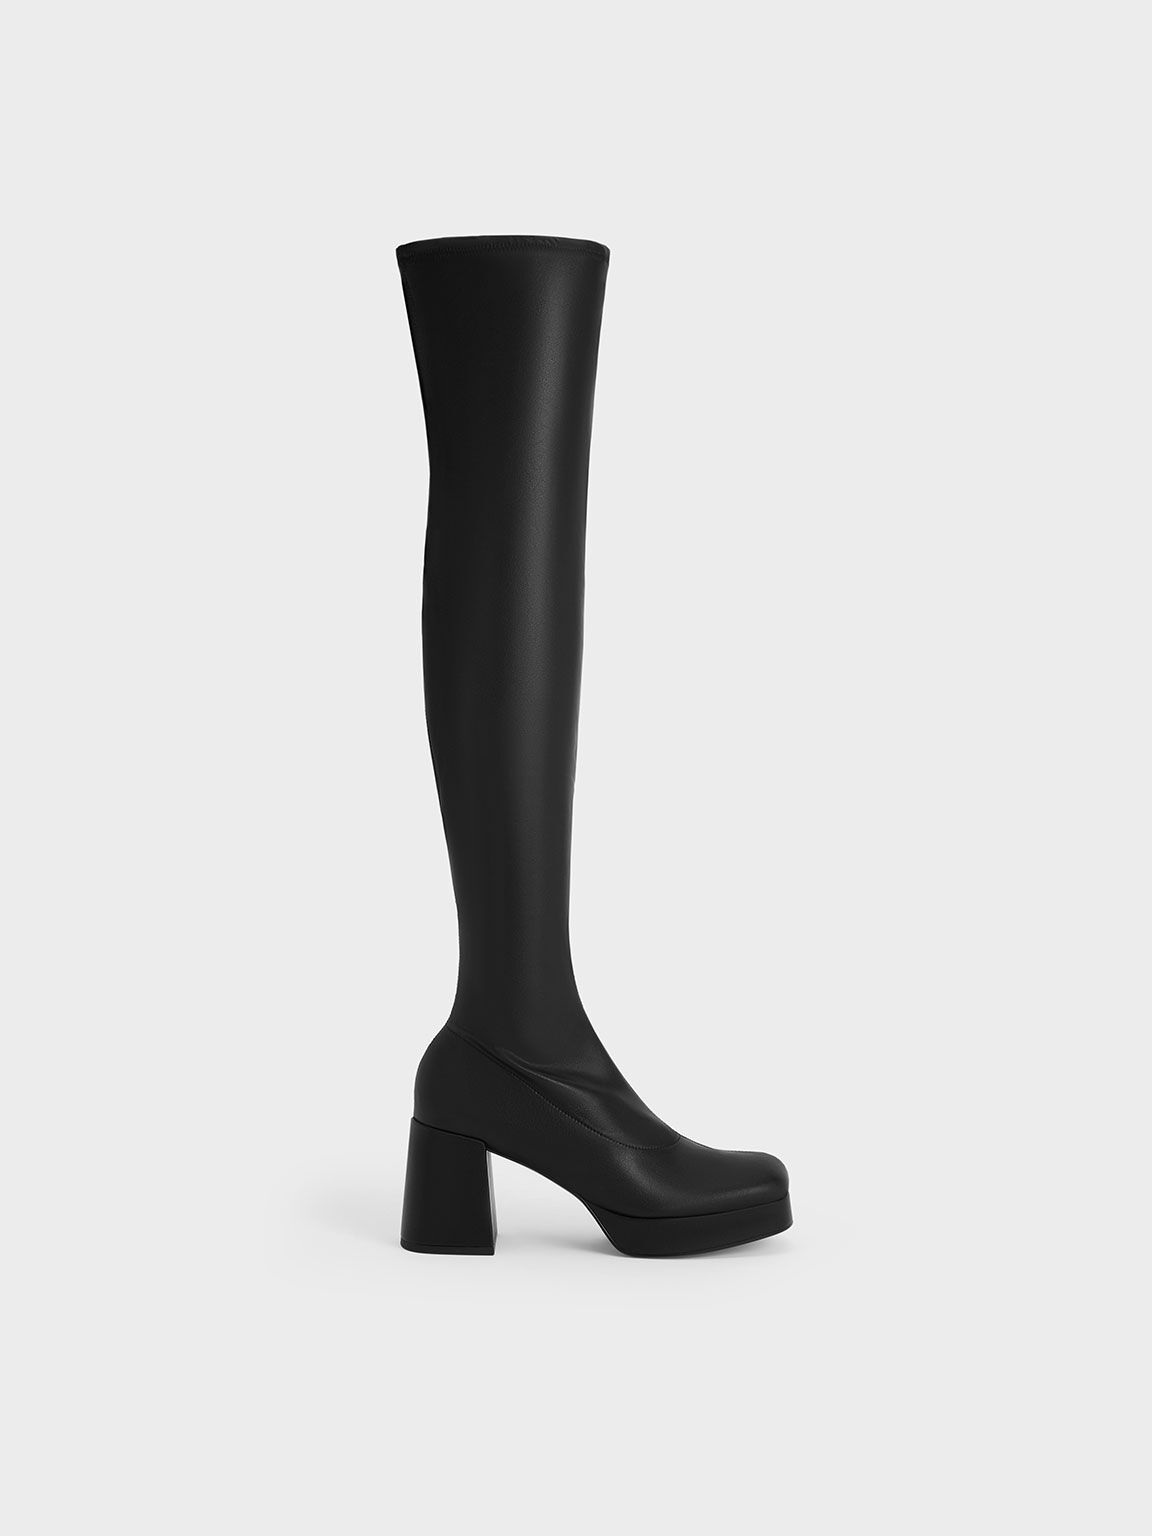 Charles & Keith - Women's Knee High Flat Boots, Chalk, US 8